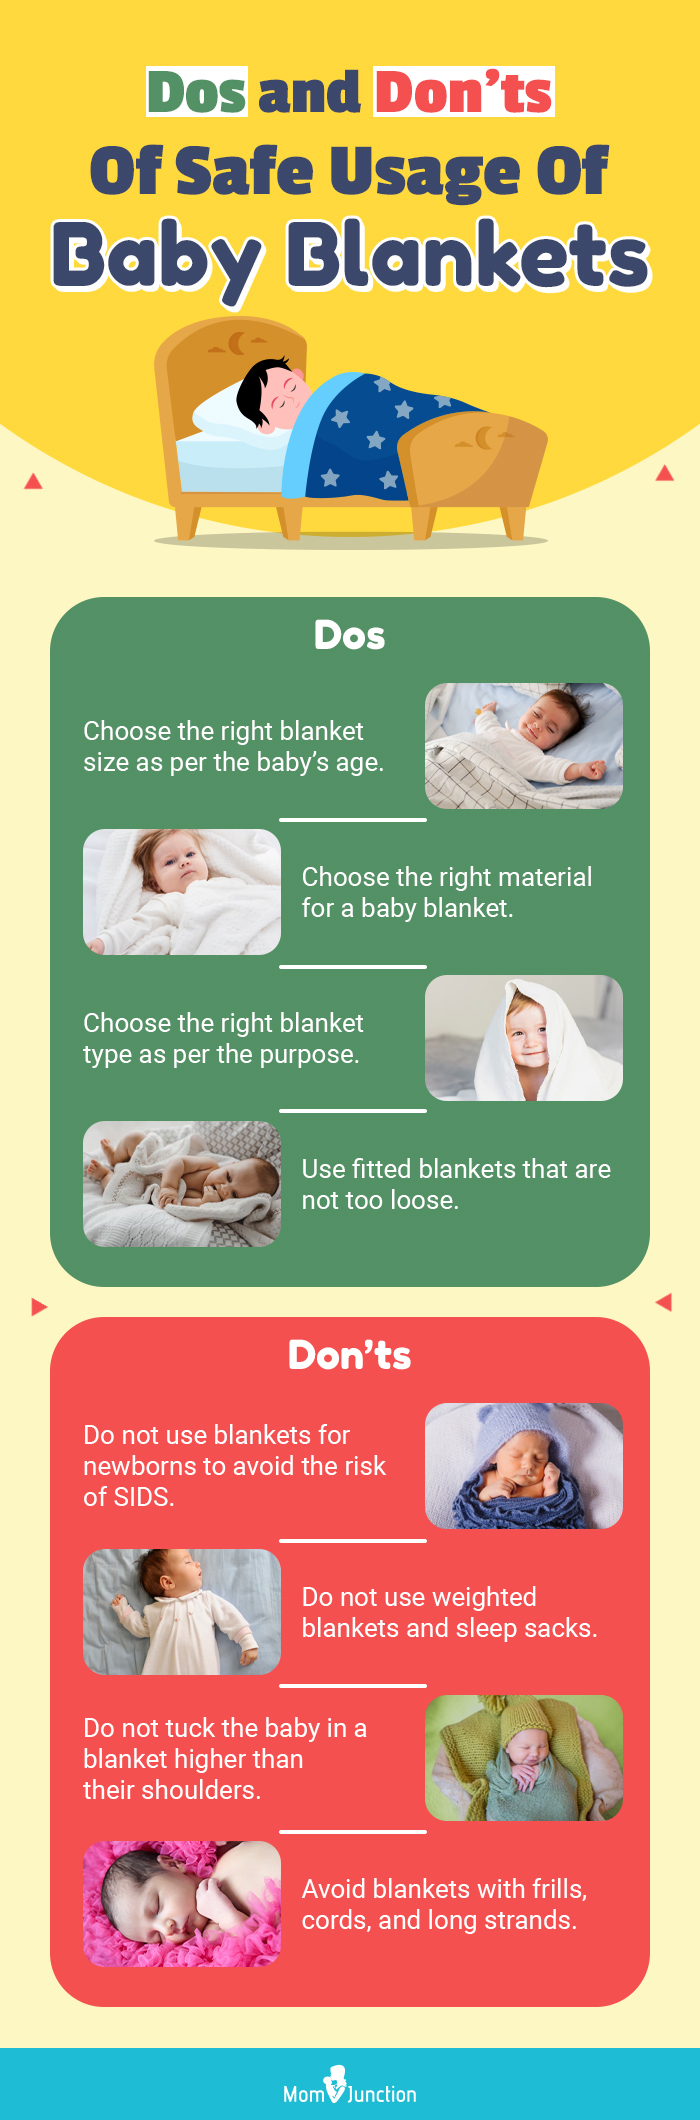 How to pick the right baby blanket size - baby blanket size chart